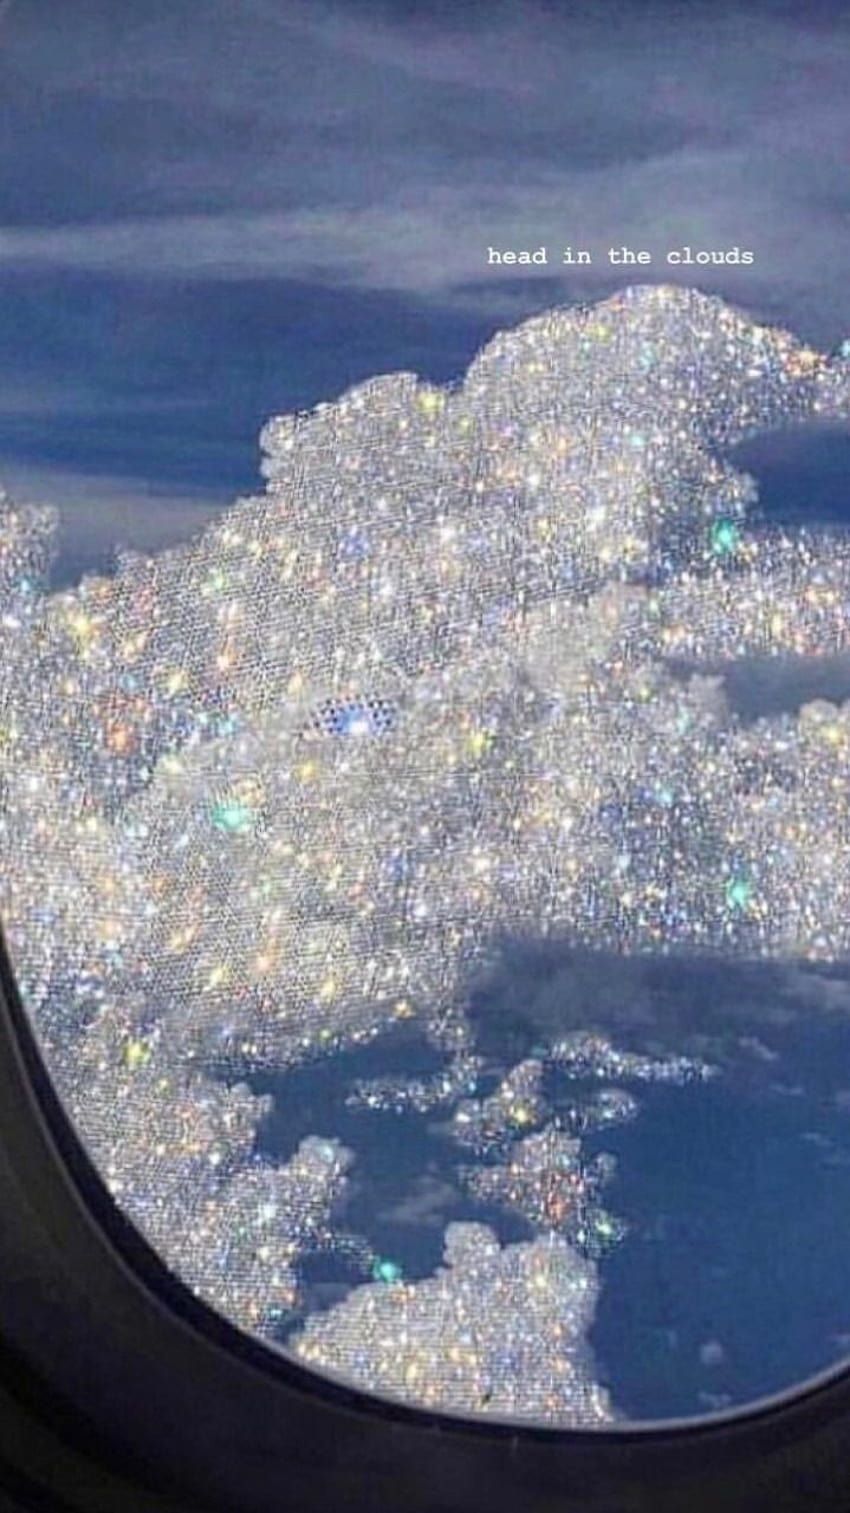 Glitter Aesthetic Tumblr, clouds with bling aesthetic laptop HD phone wallpaper